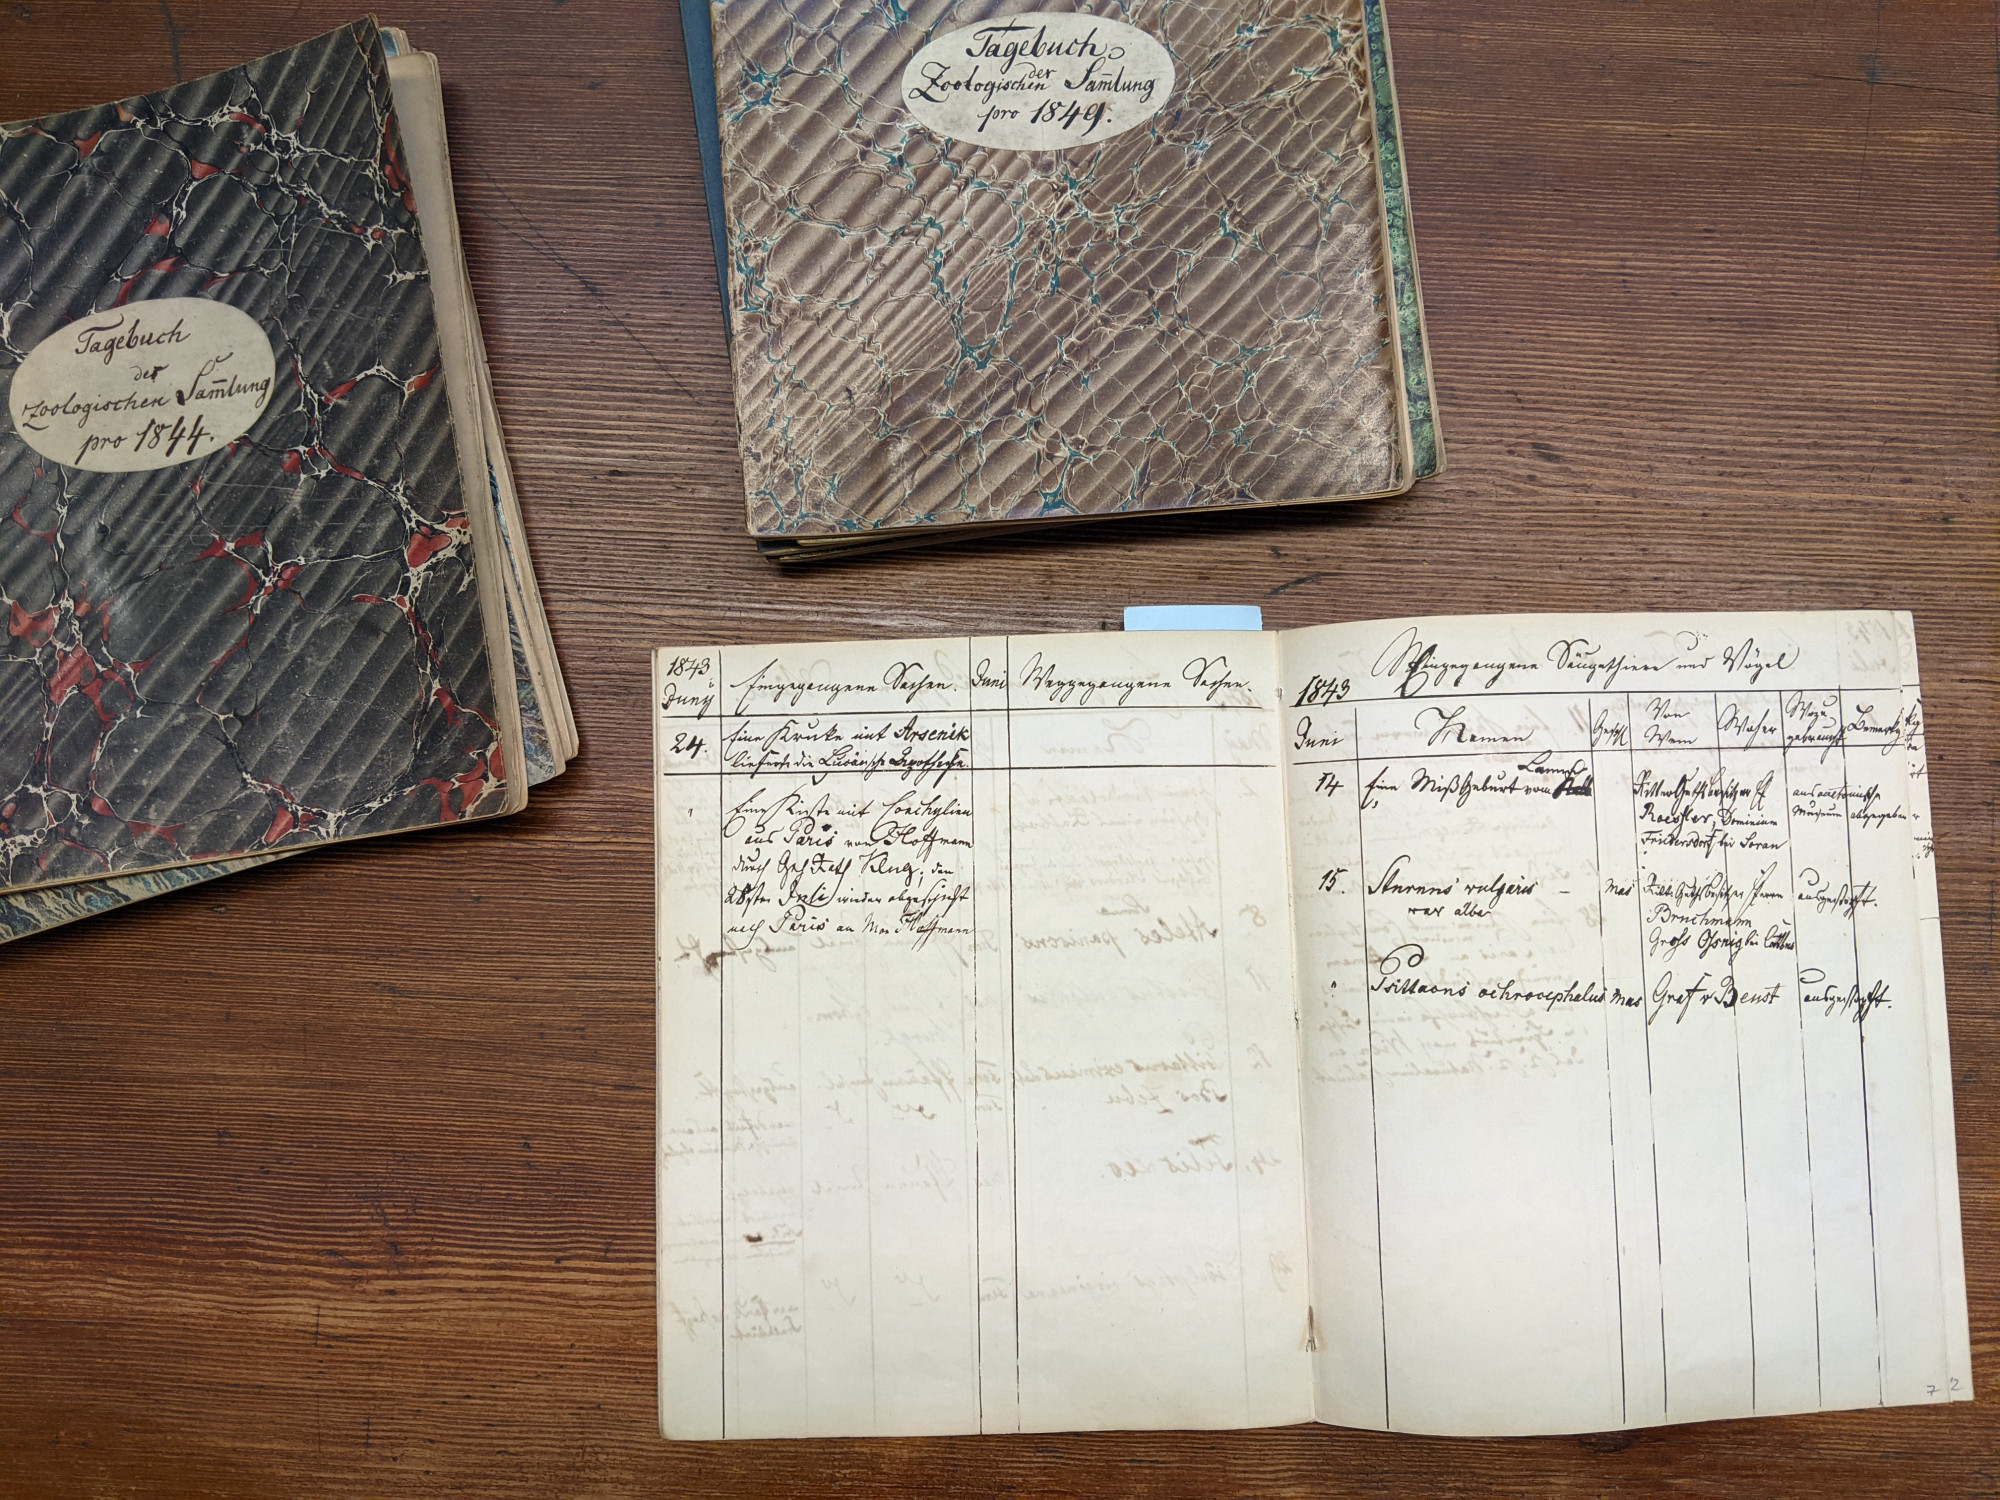 Three slightly tattered notebooks, one of them open, lie on a wooden surface. The titles of the two covers are in cursive handwriting: "Logbook of the Zoological Collection", followed by the years 1844 and 1849. The open book displays a double page for June 1843, which has been divided by hand into several columns of varying widths. About a third of the page is covered in writing.